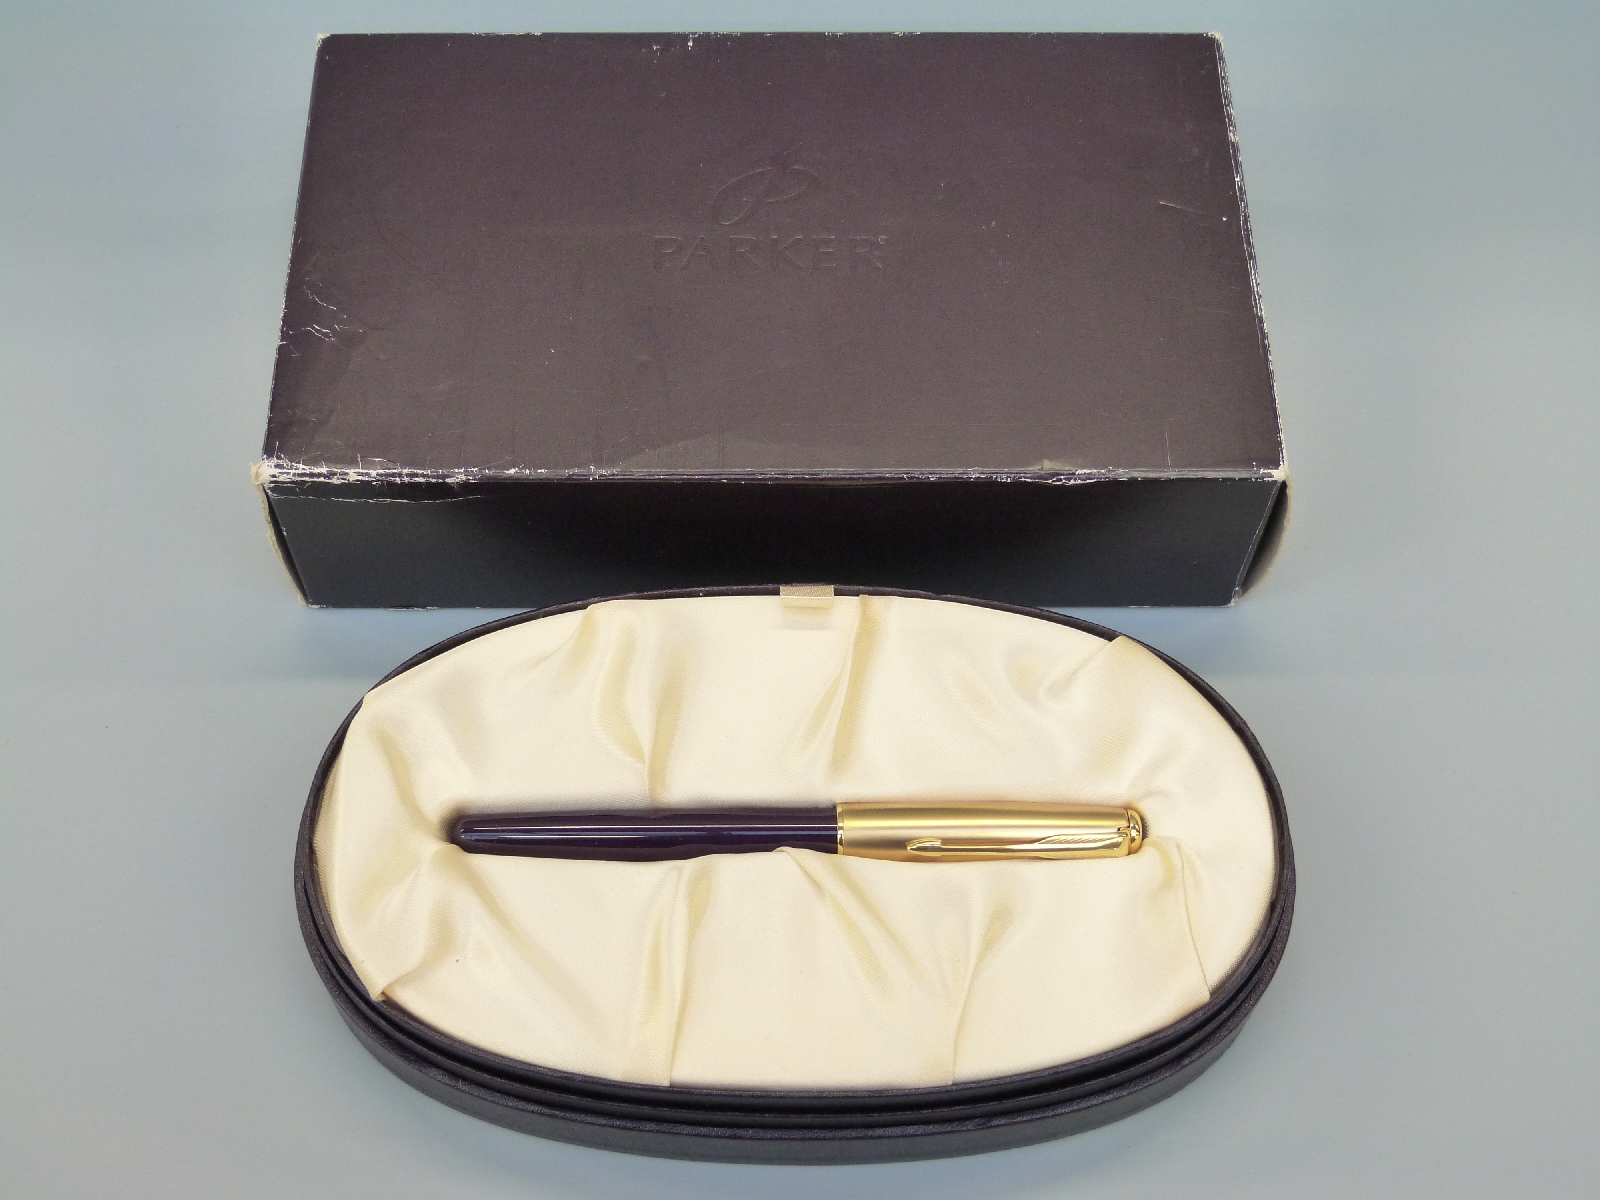 Parker Accession Golden Jubilee fountain pen in fitted case with booklet and outer box